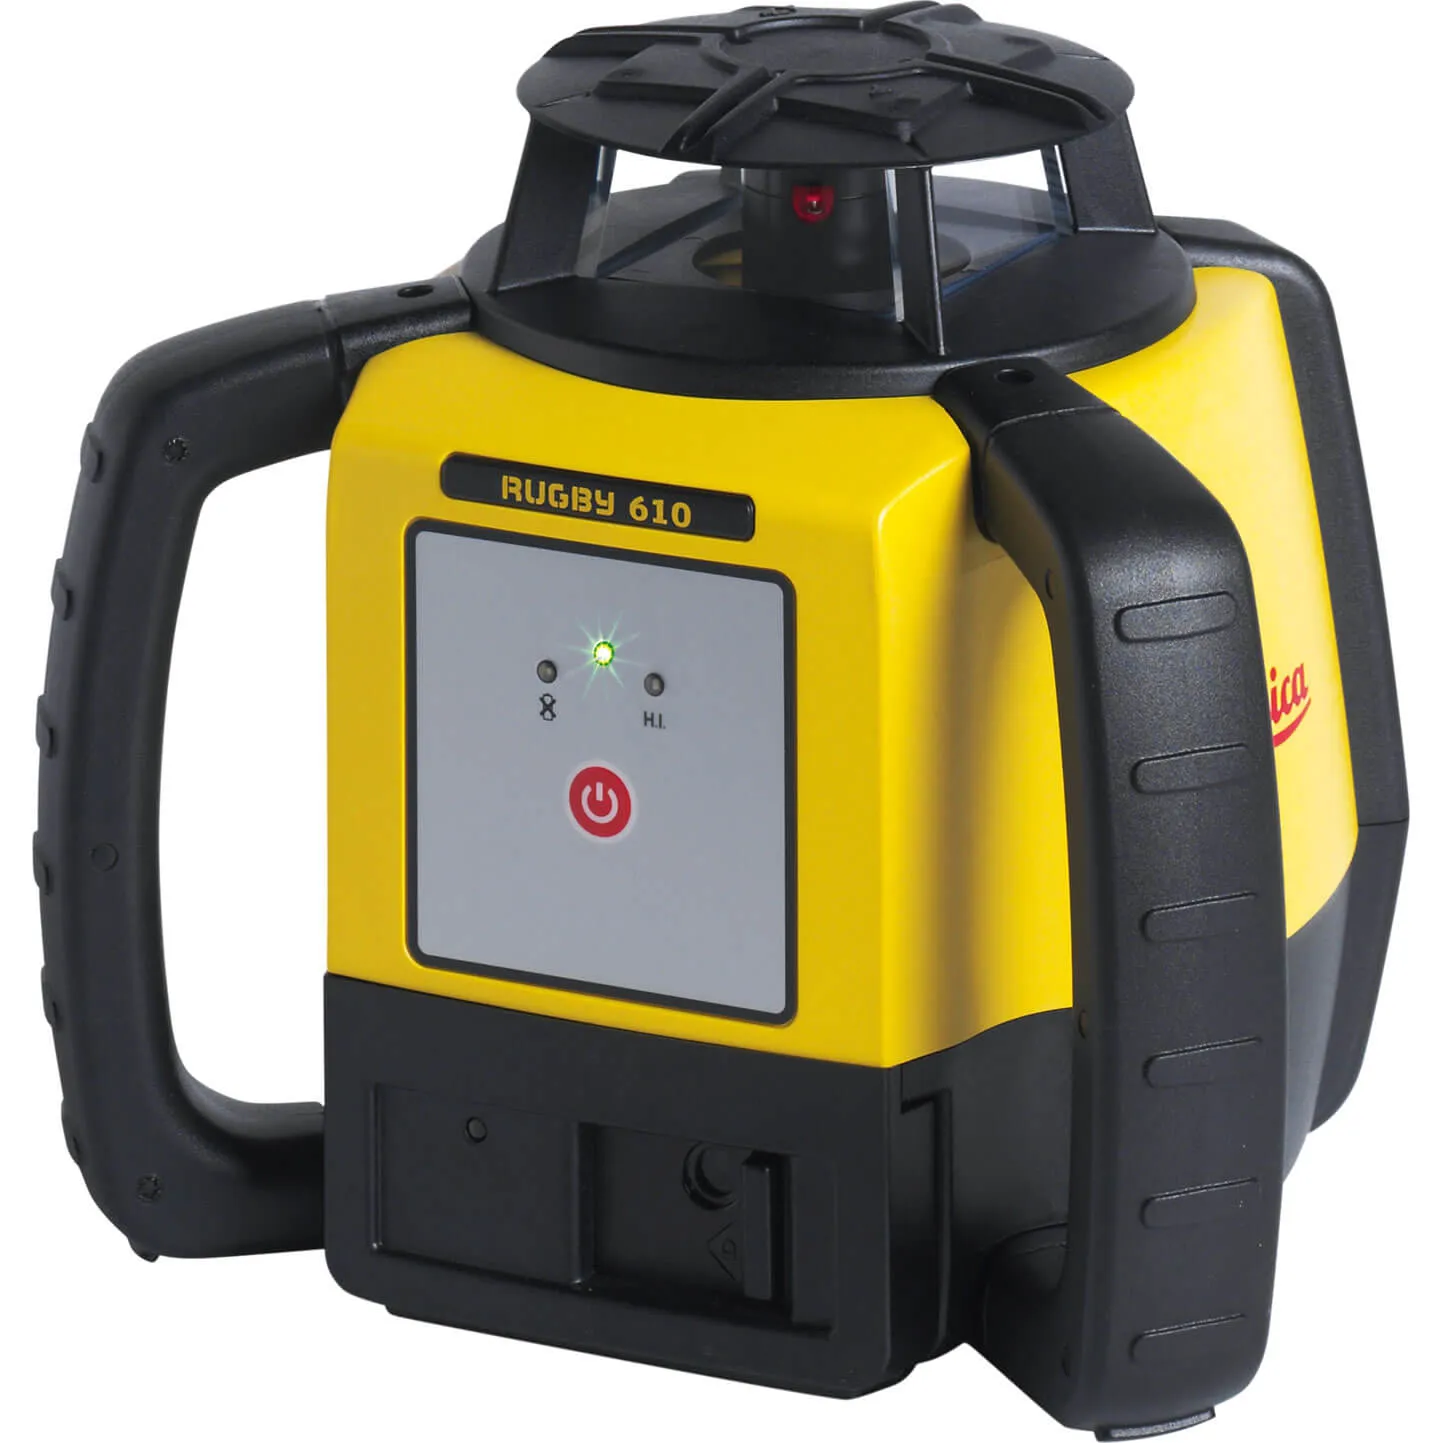 Leica Geosystems Rugby 610BL Rotating Self Levelling Laser Level